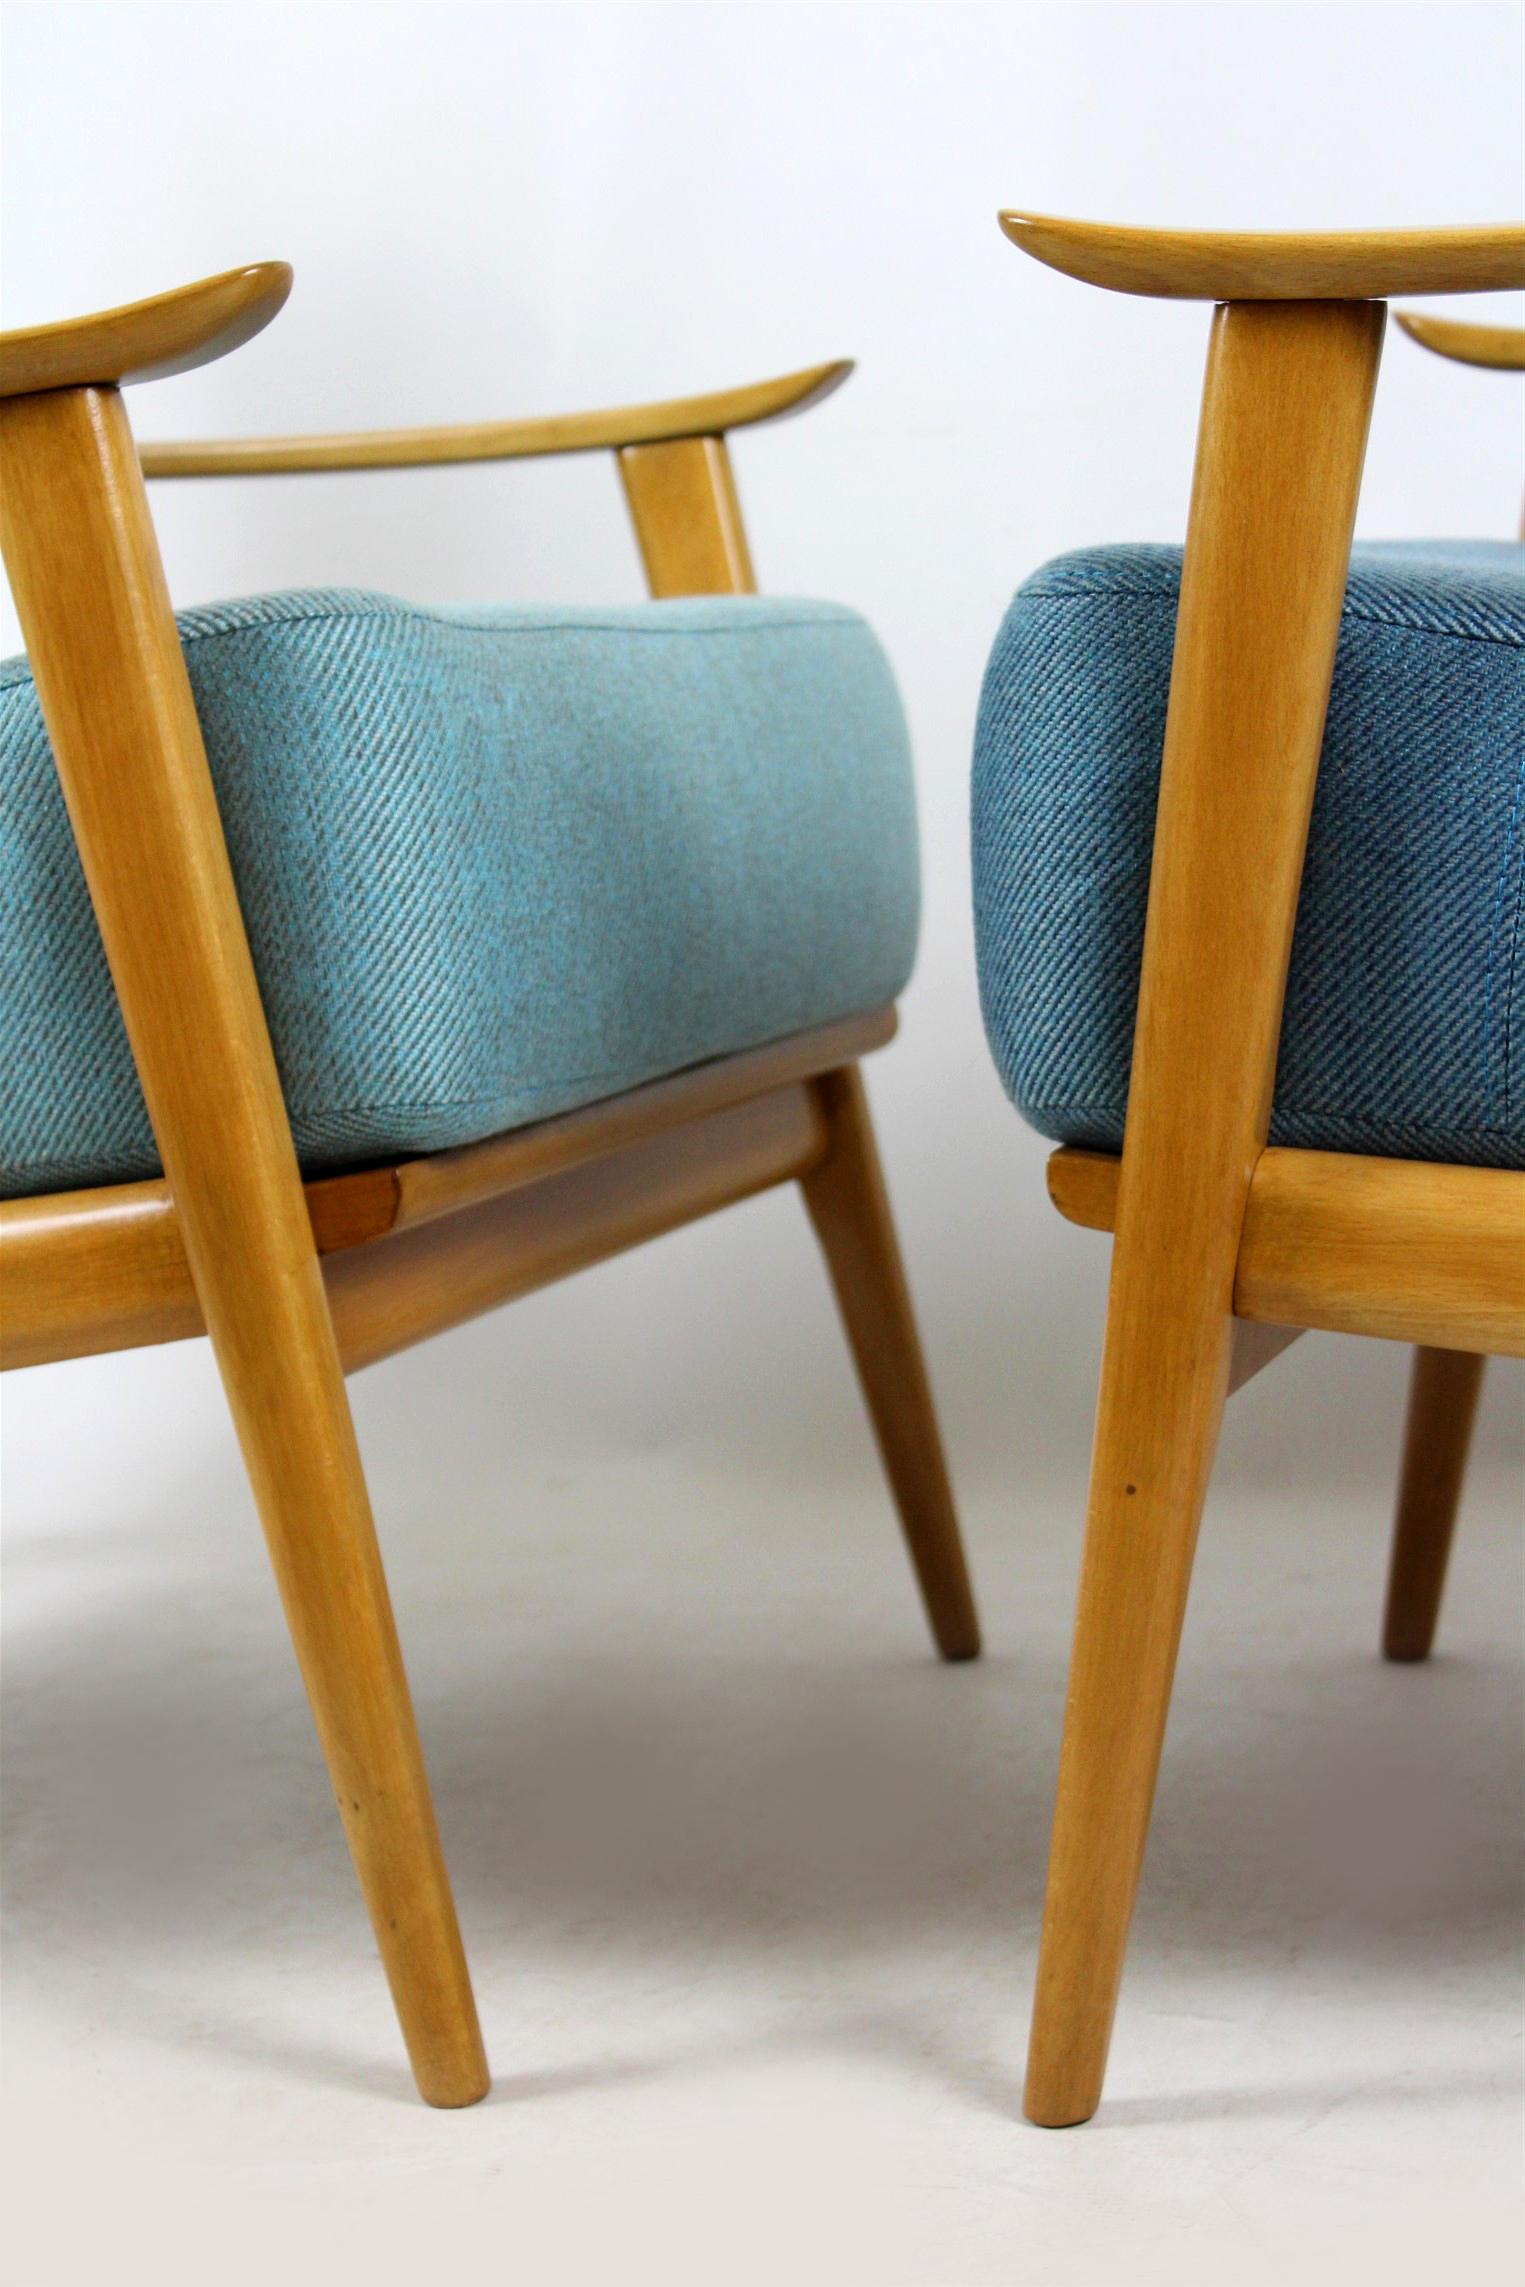 Mid-20th Century Midcentury Scandinavian Blue and Turquoise Armchairs, 1960s, Set of Two